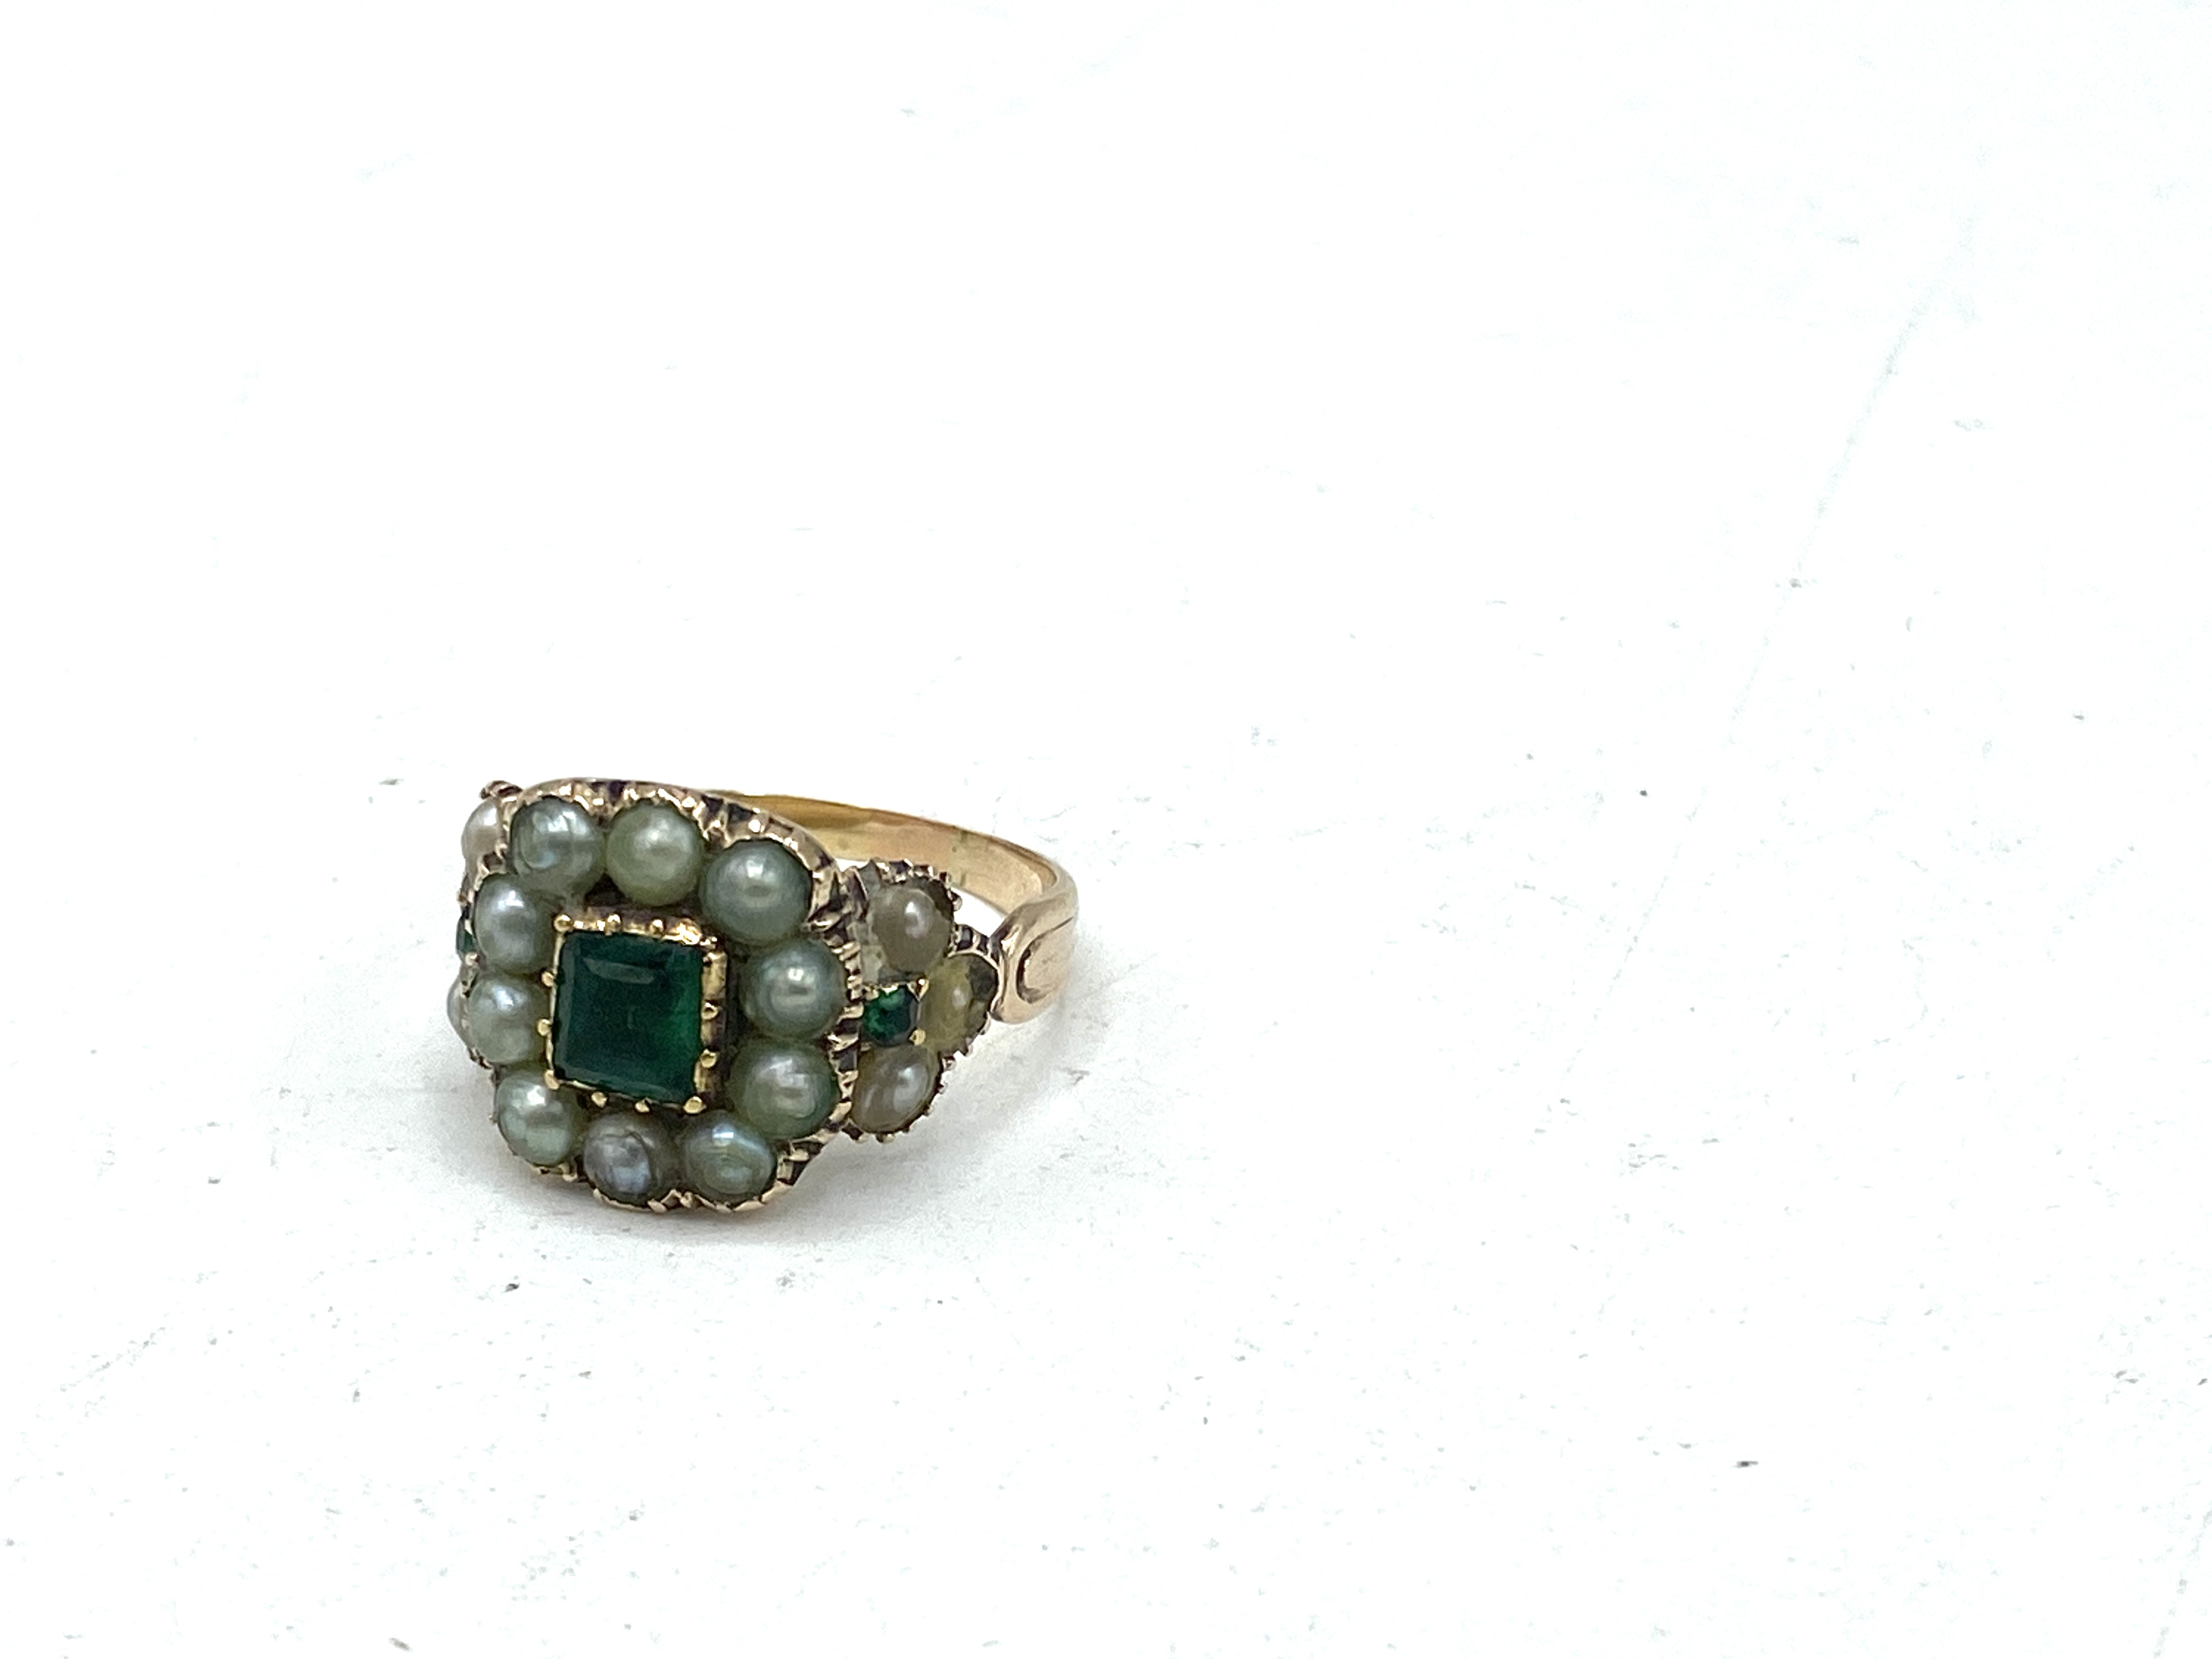 19th century emerald and pearl ring - Image 7 of 8